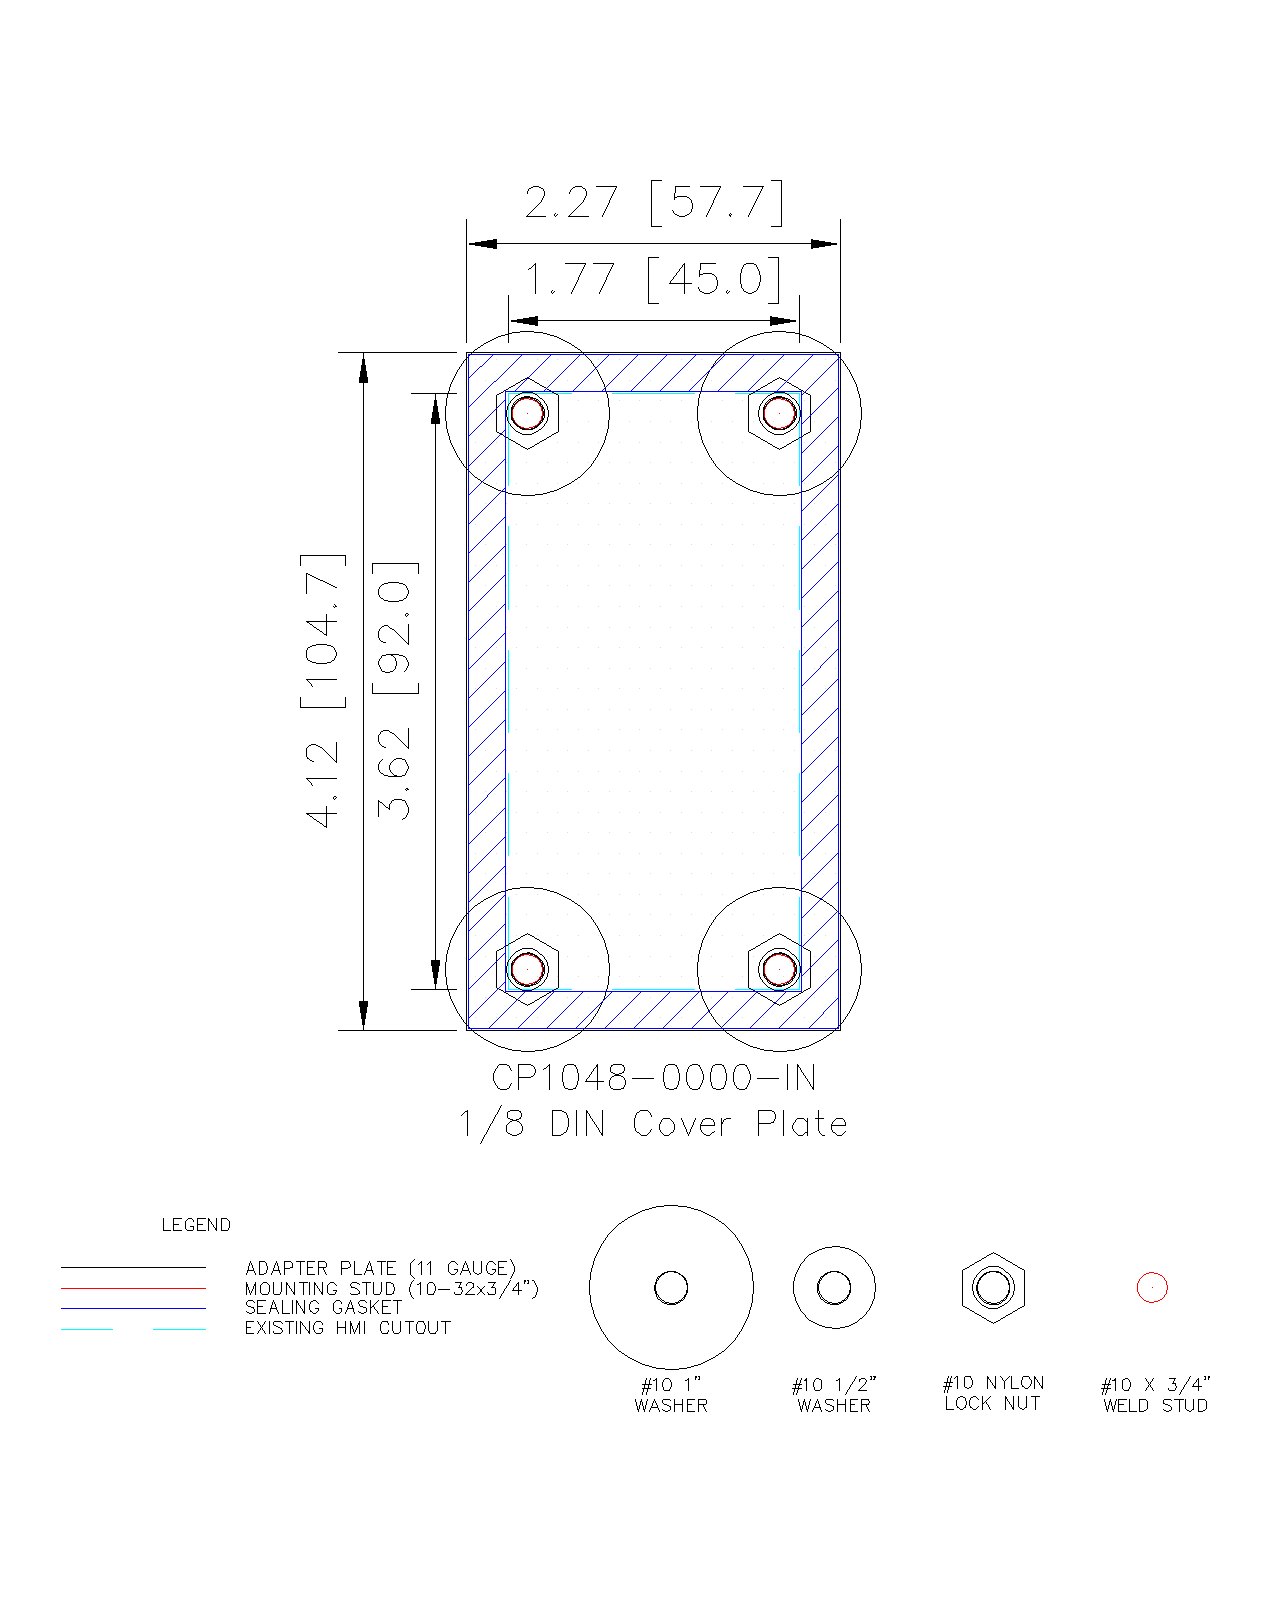 Cover Plate - 1/8 DIN